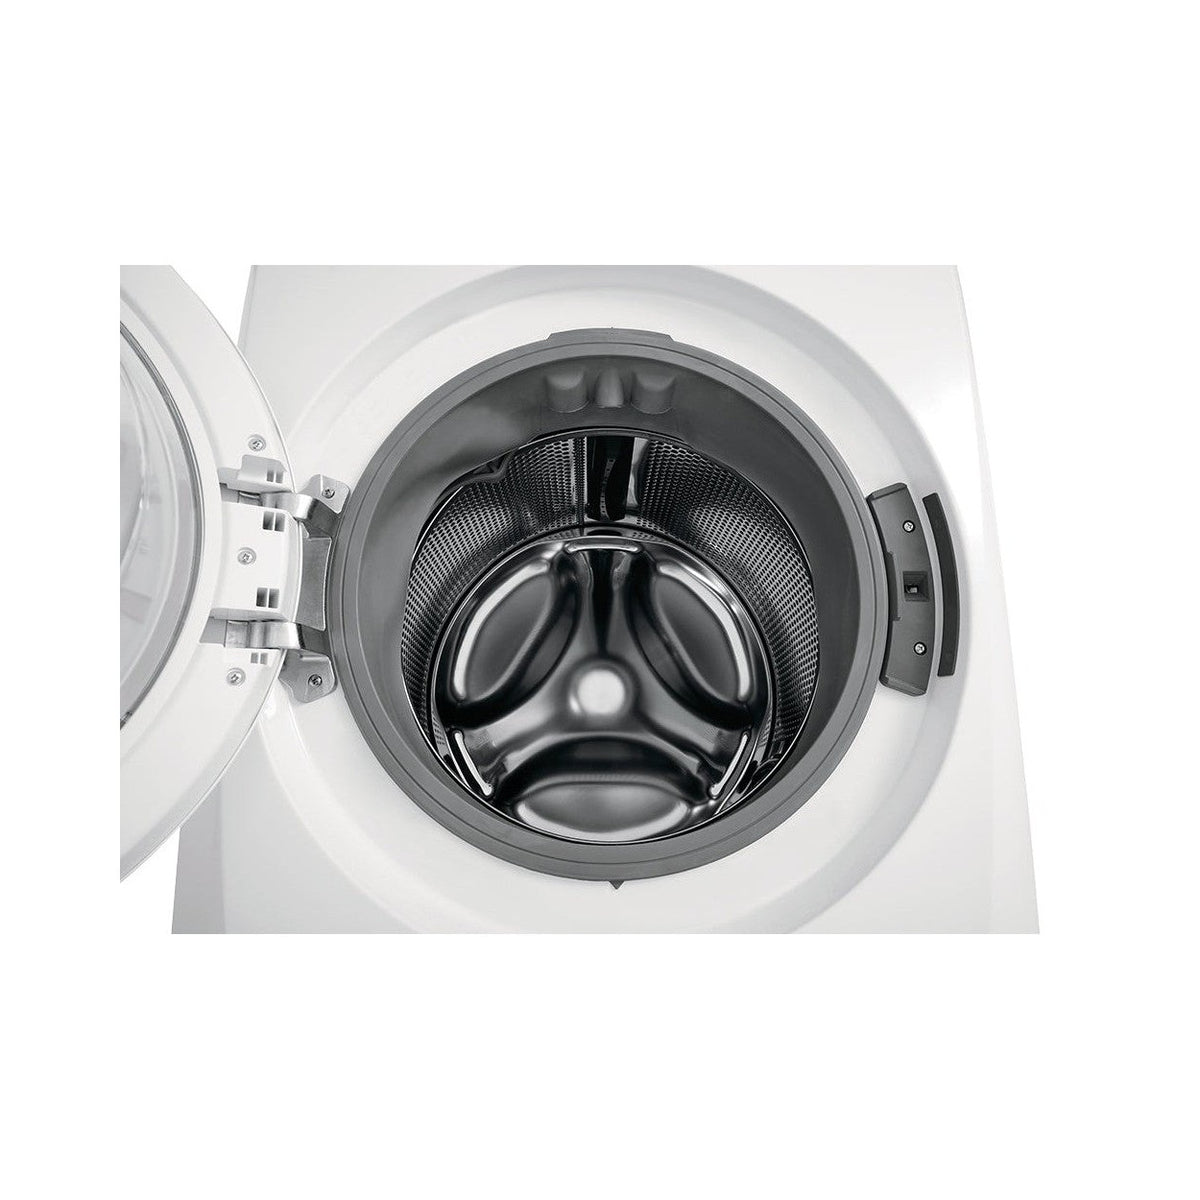 FRIGIDAIRE FWFX22D4EW Front Load Washer 4.3 Cu Ft